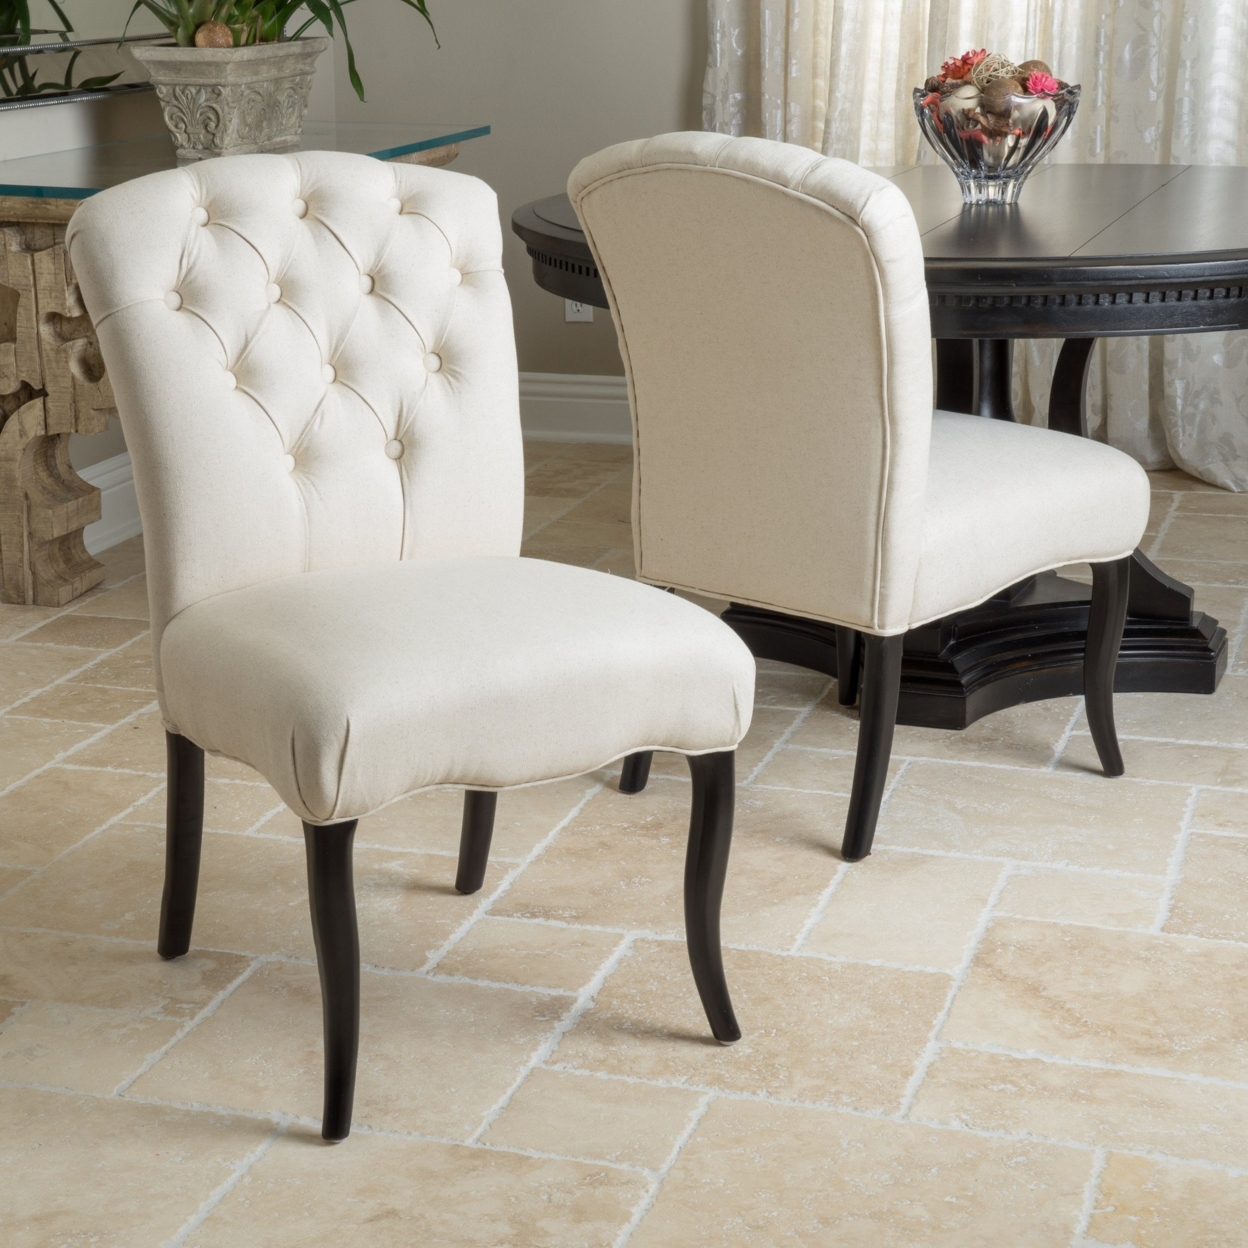 Jaelynn Linen Colored Fabric Dining Chairs (Set Of 2)